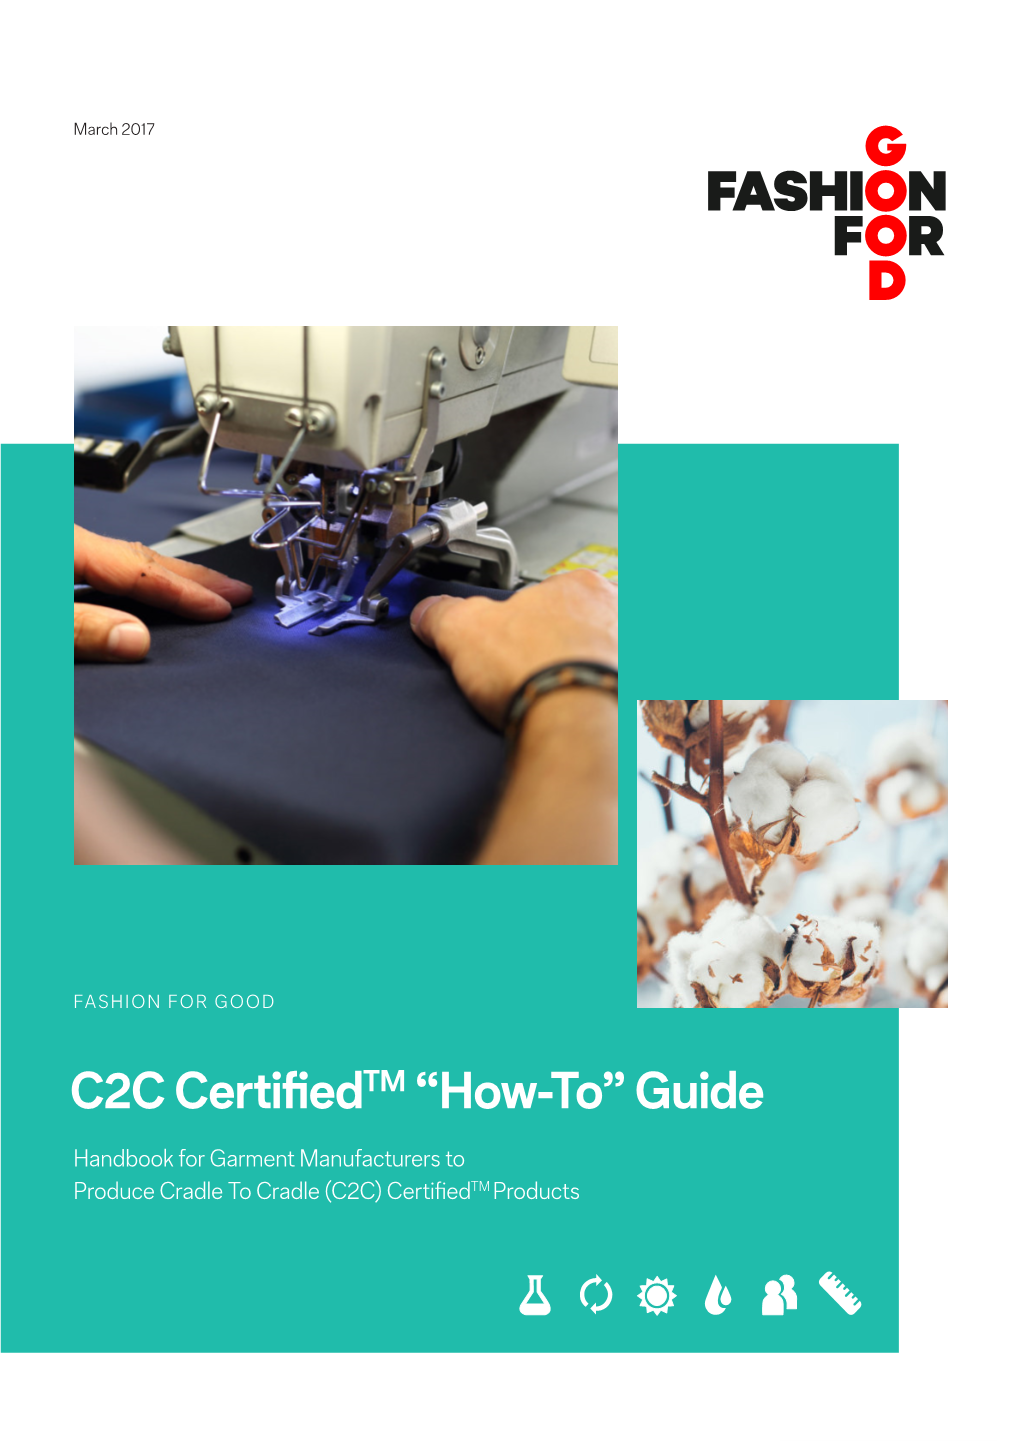 C2C Certifiedtm “How-To” Guide